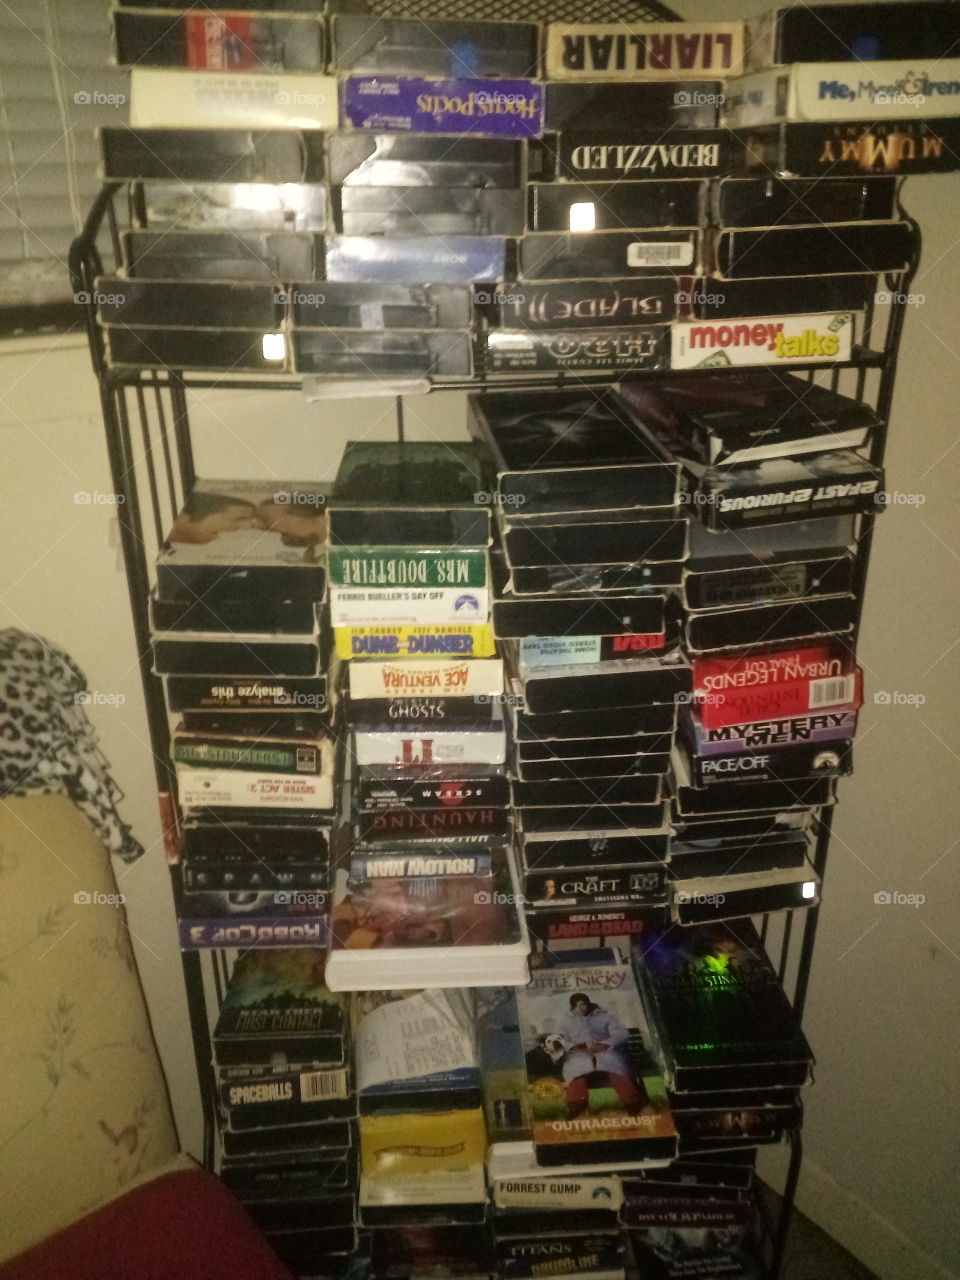 hundreds of classic movies on VHS a classic that to me will never go out of style